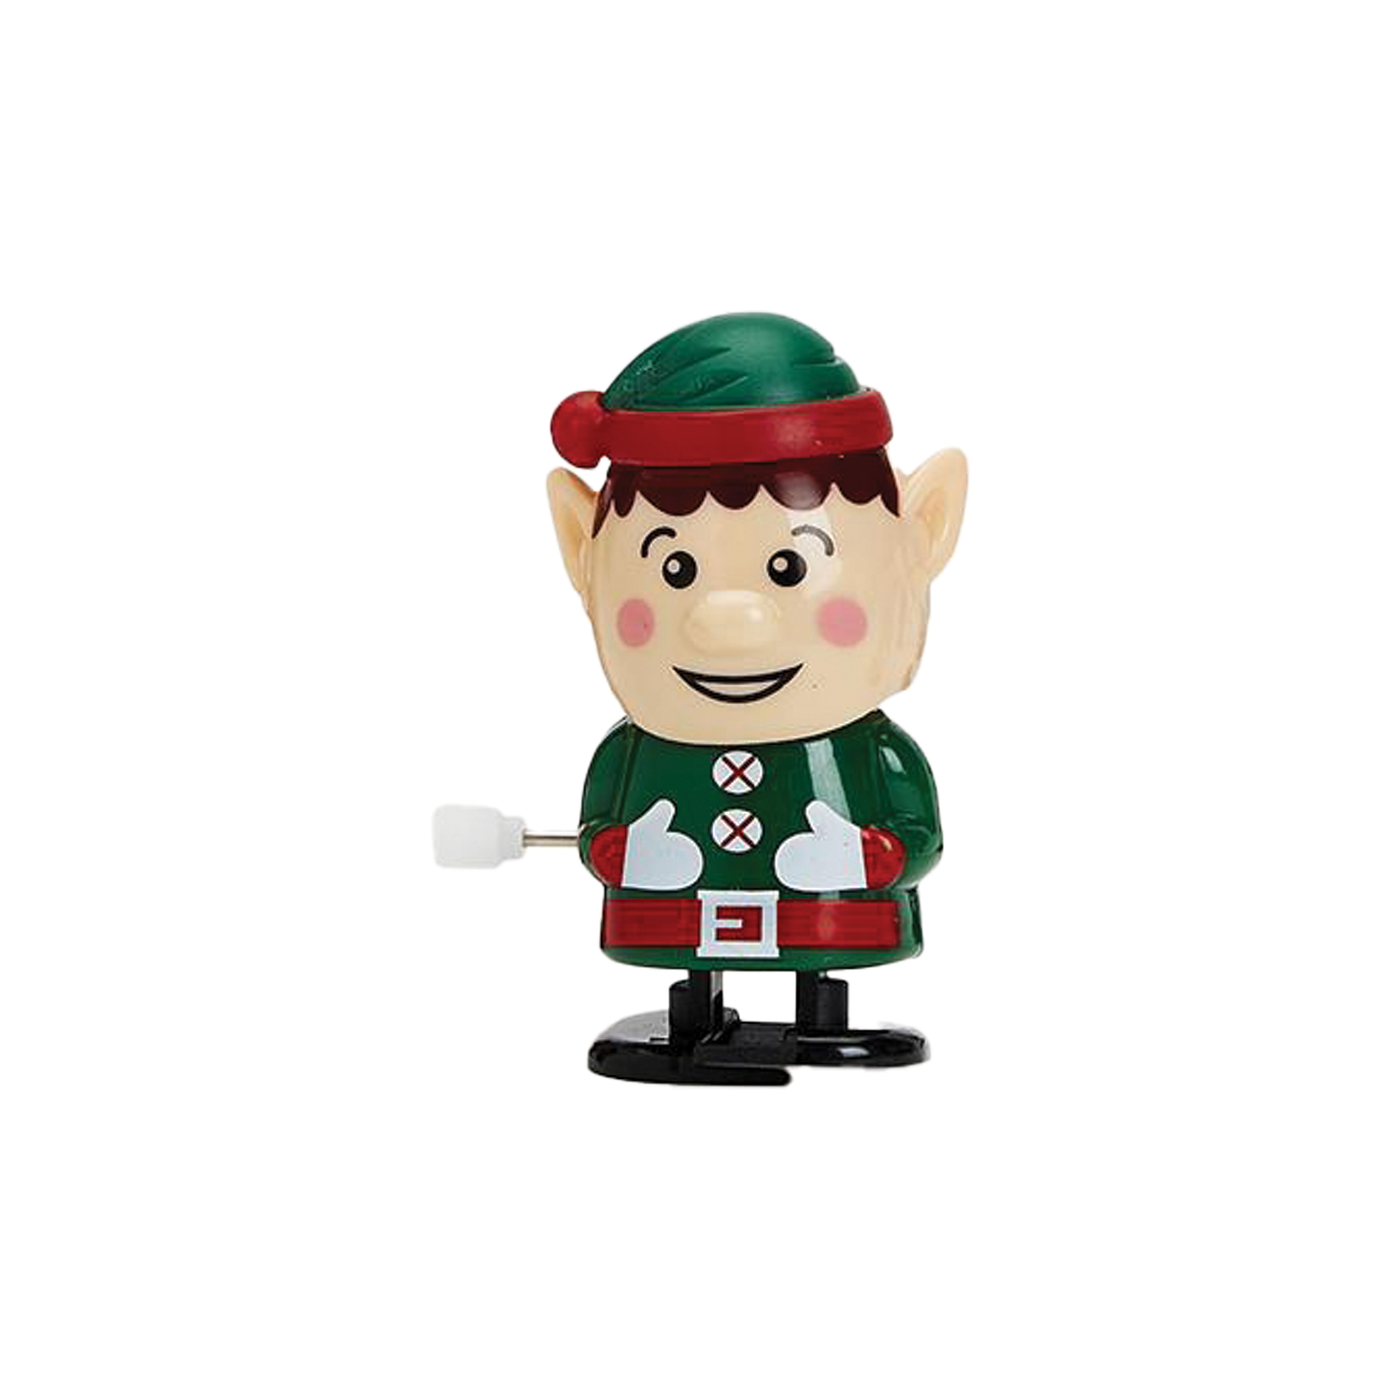 Jolly Walkers Holiday Wind Up Toy - Elf